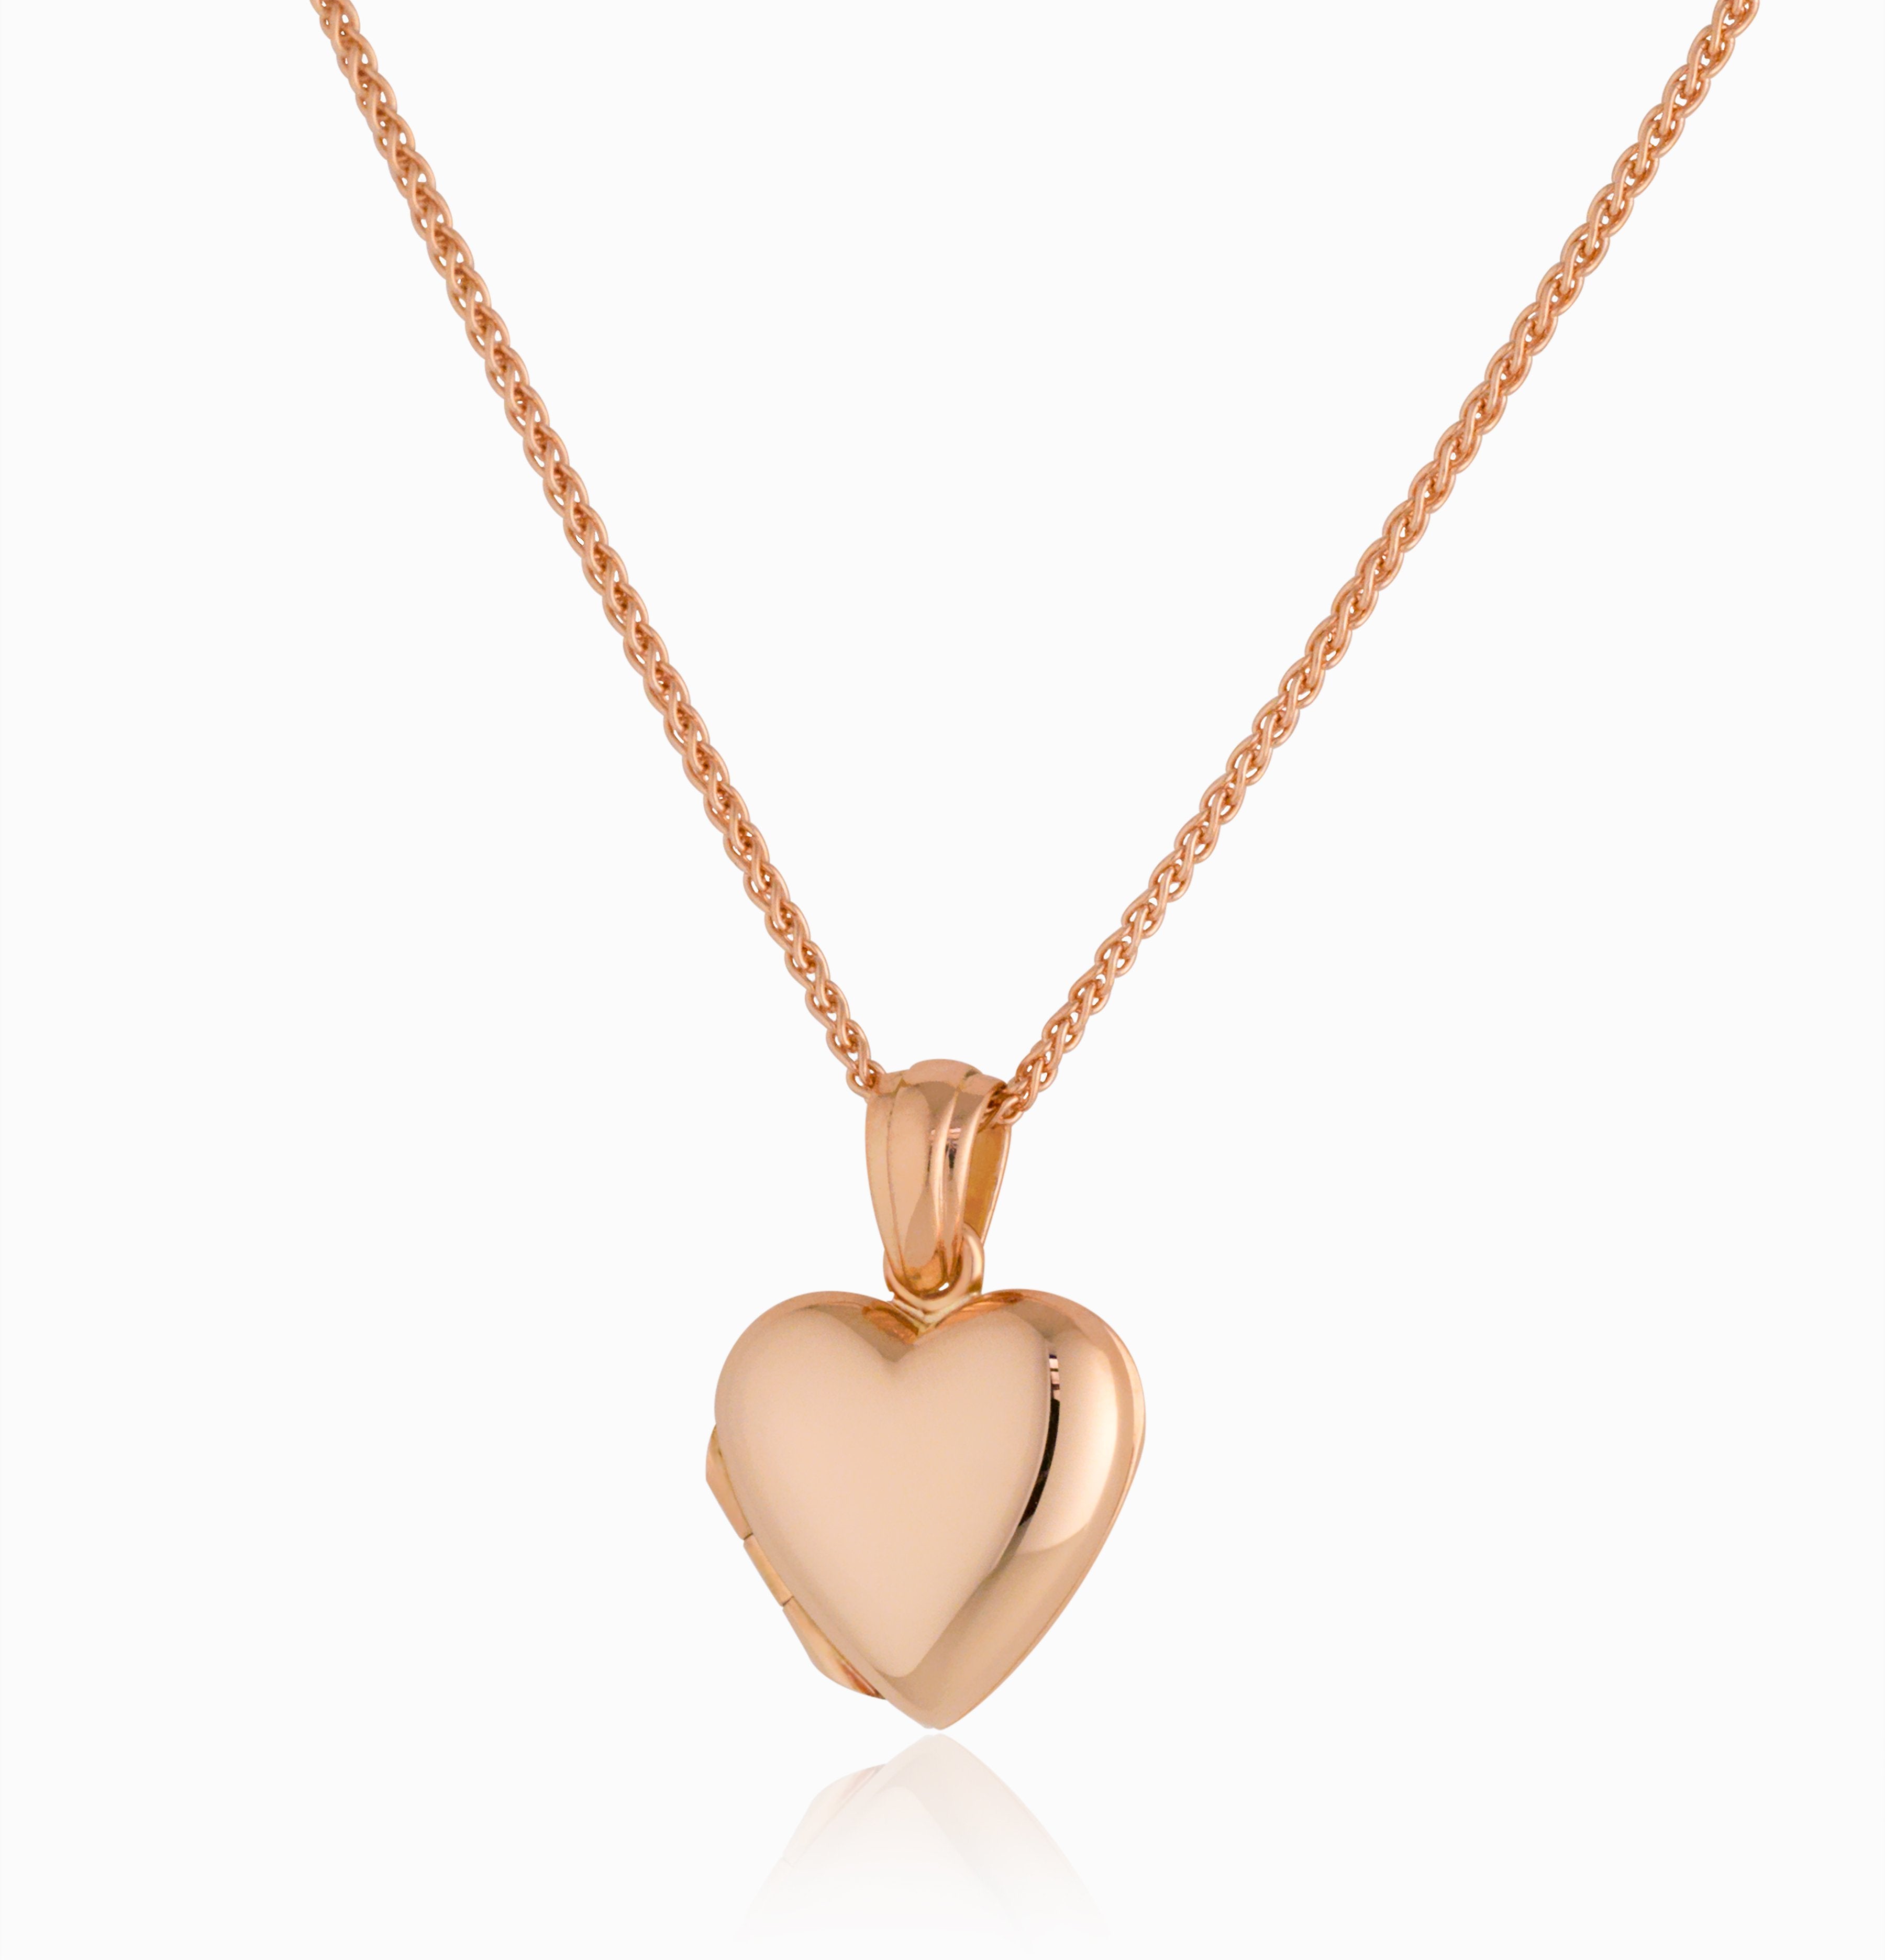 An 18 ct rose gold heart shaped locket hanging on an 18 ct rose gold spiga chain.